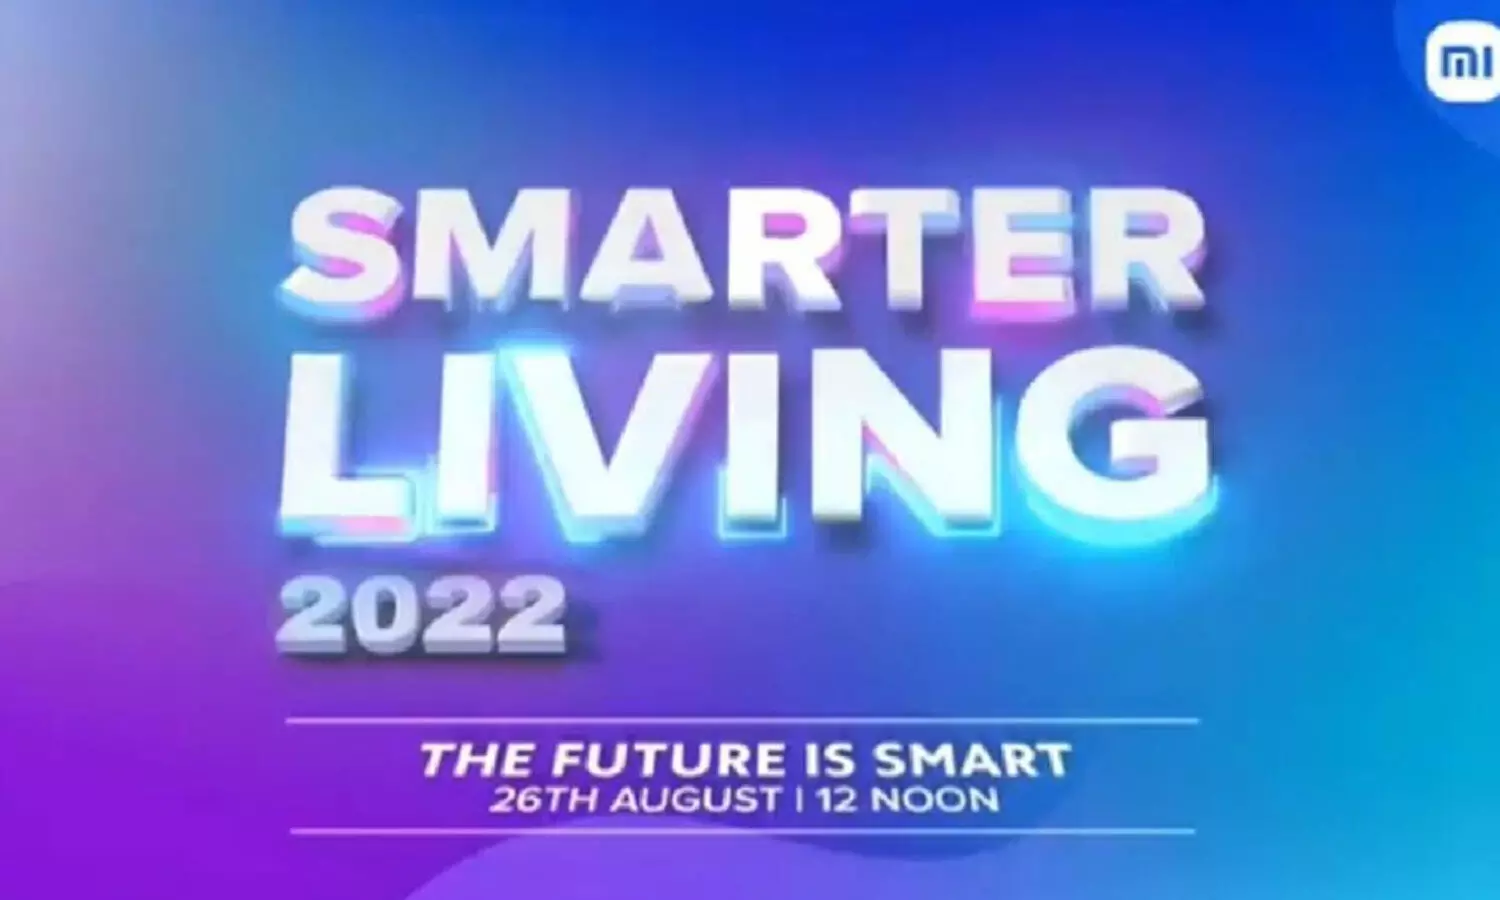 Xiaomi Smarter Living 2022 Event in India; Expected to launch Mi Notebook, Band 6